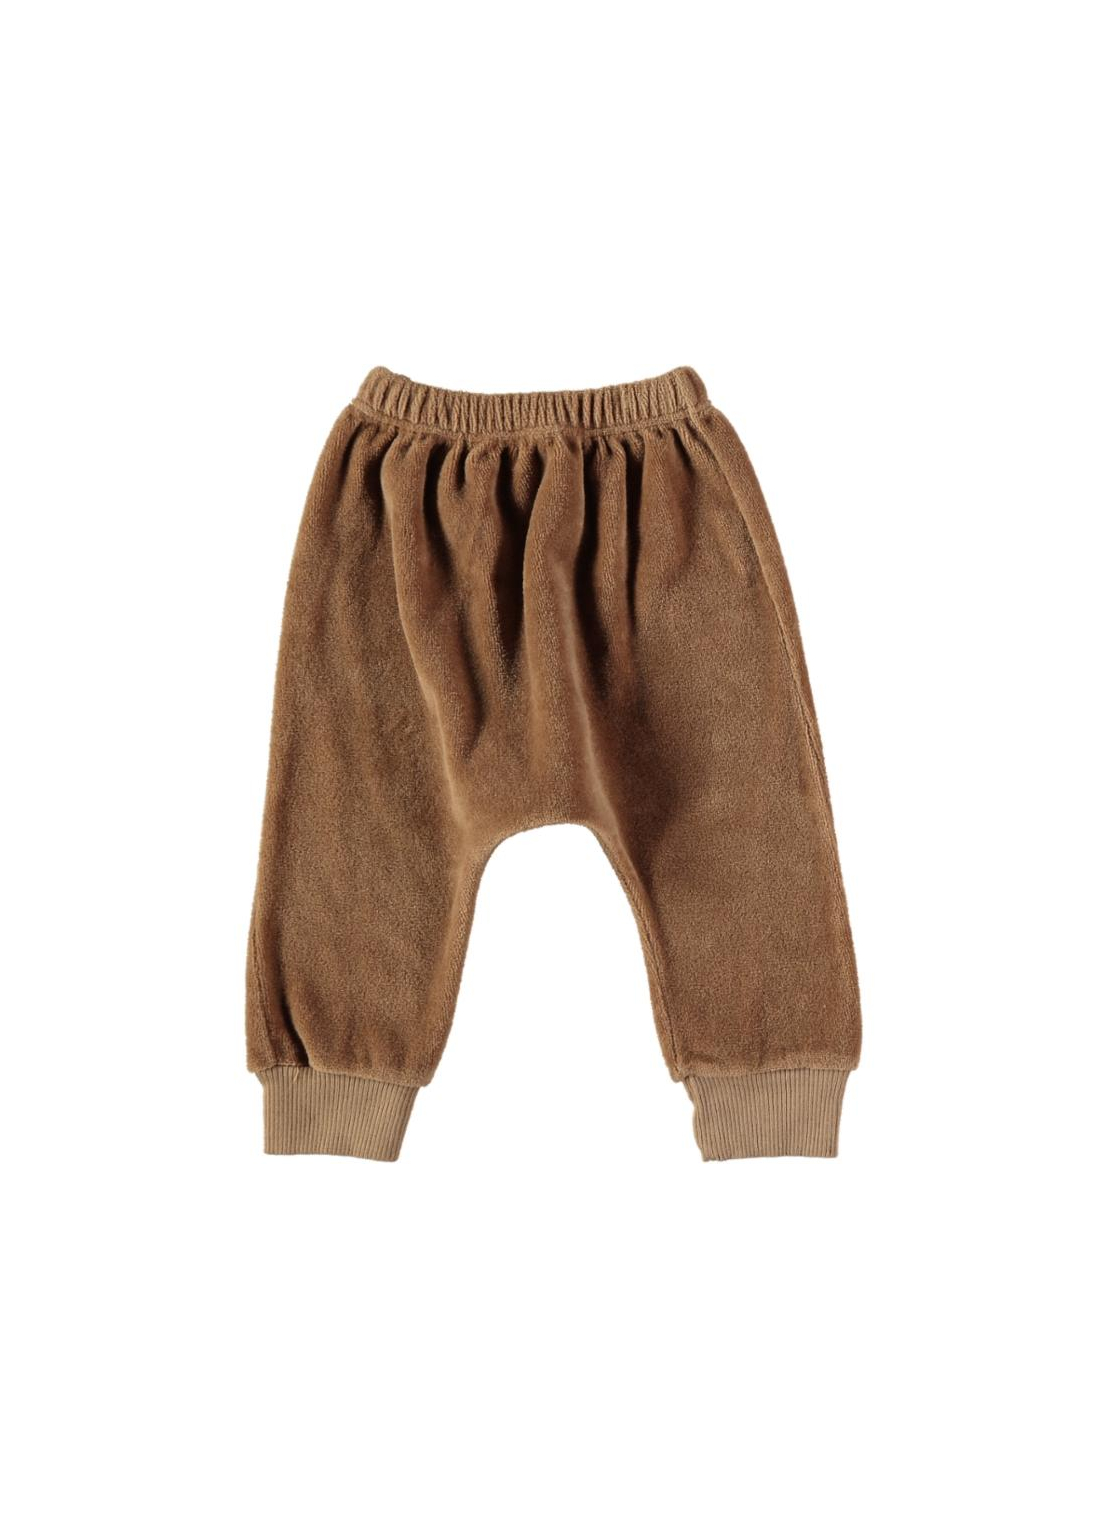 Baby TROUSERS Unisex- 85% Organic Cotton 15% PES - knitted